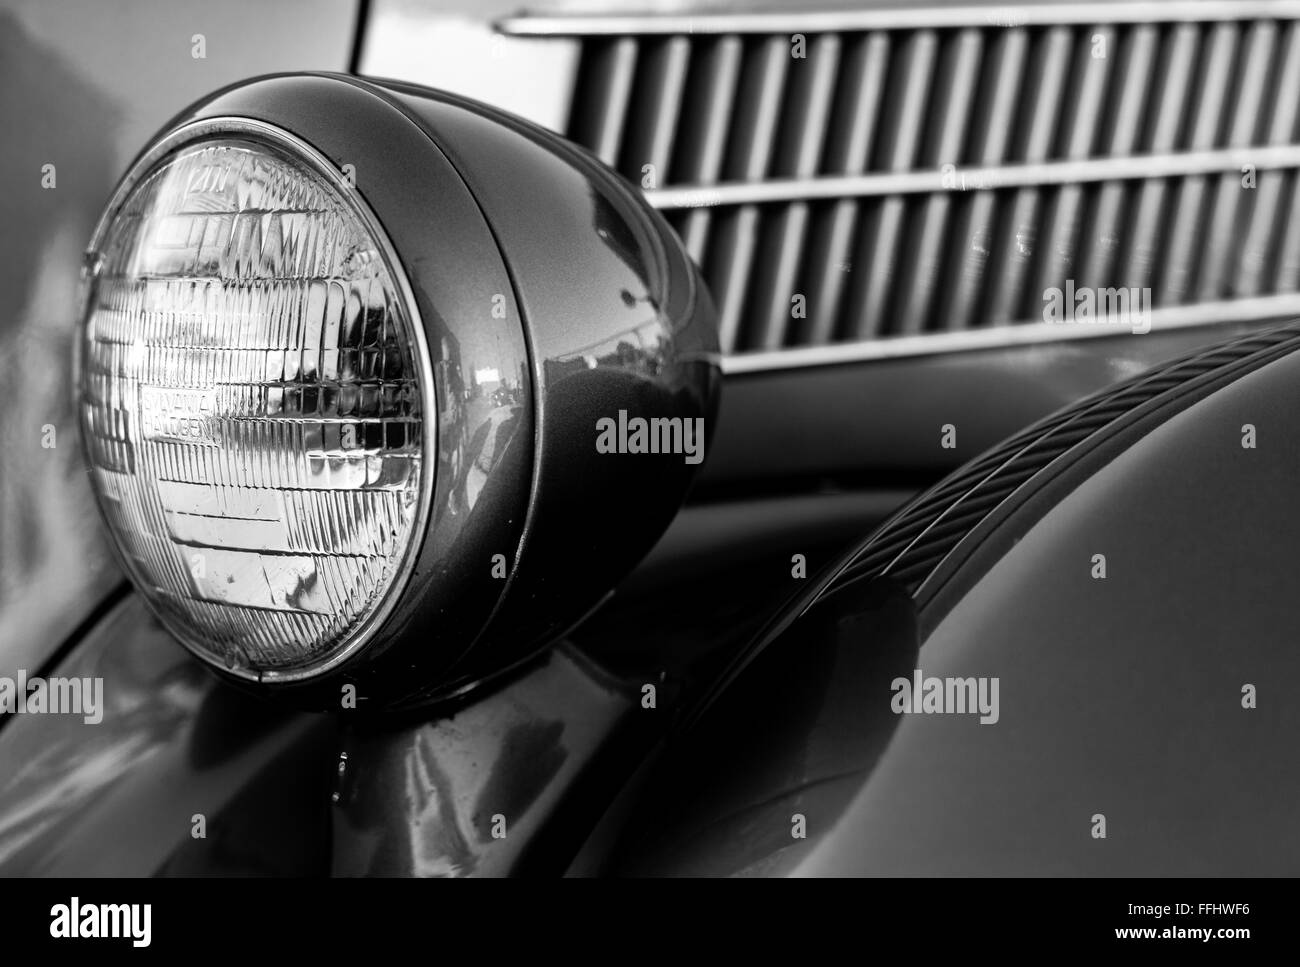 Detailed images of restored classic and vintage automobiles. Stock Photo